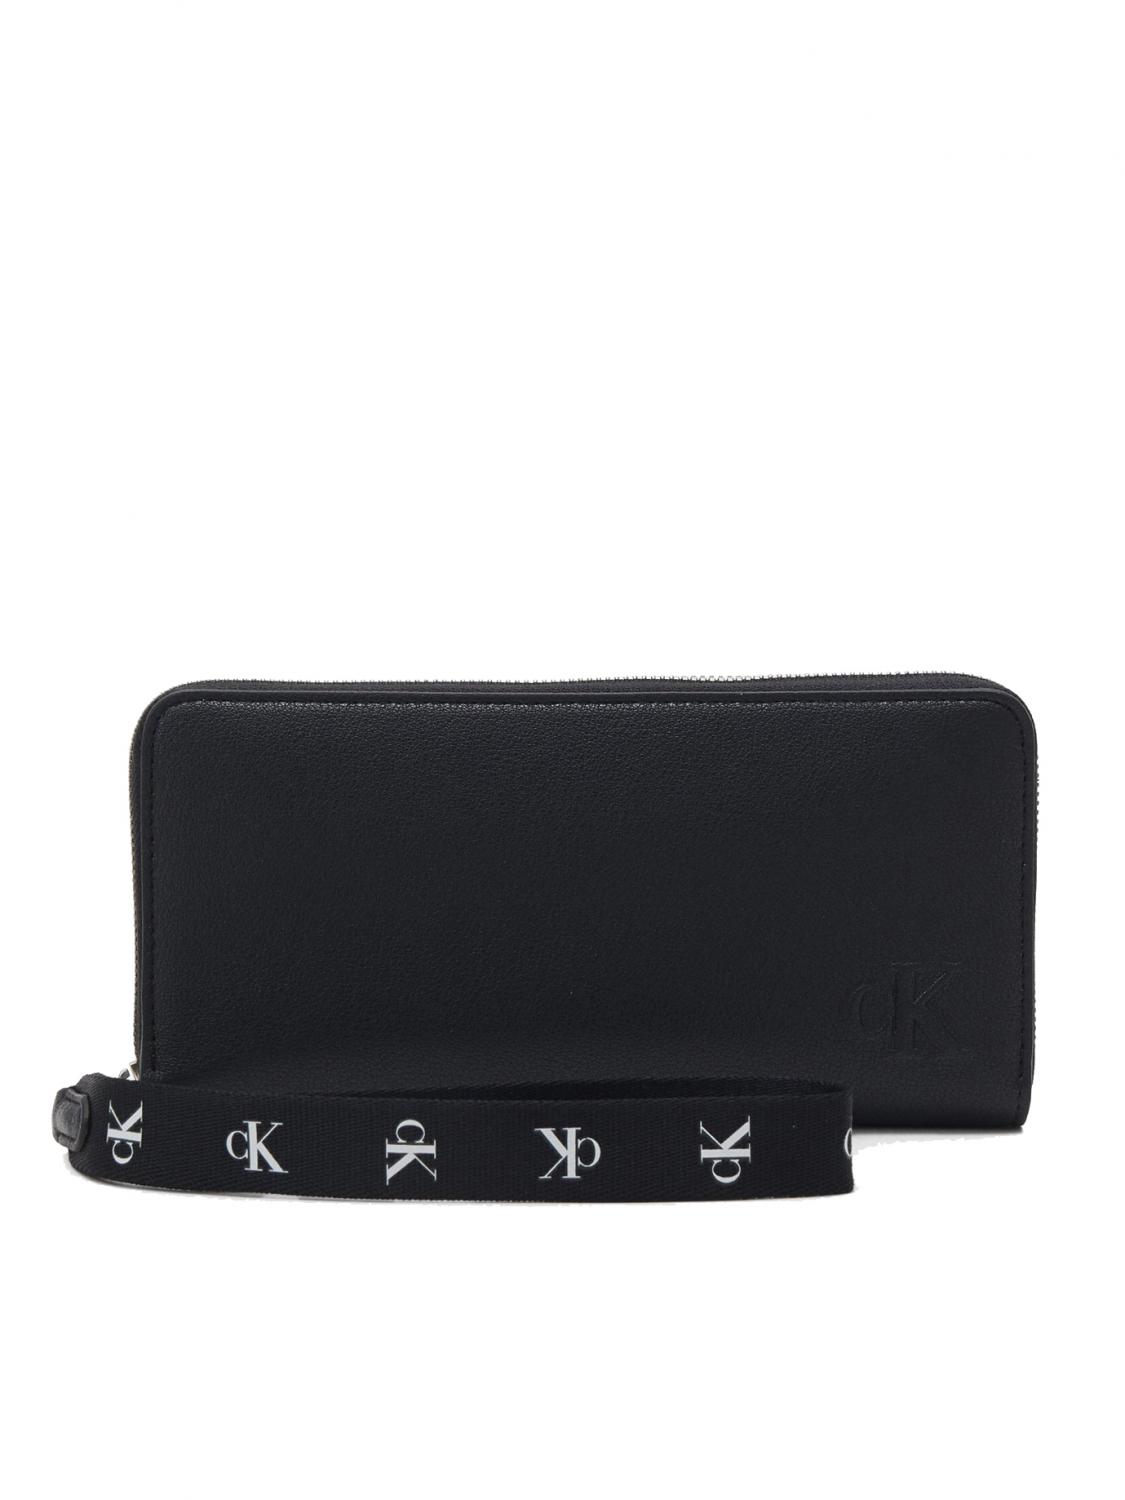 Calvin Klein Ultralight Large Zip Around Wallet Black - Buy At Outlet  Prices!